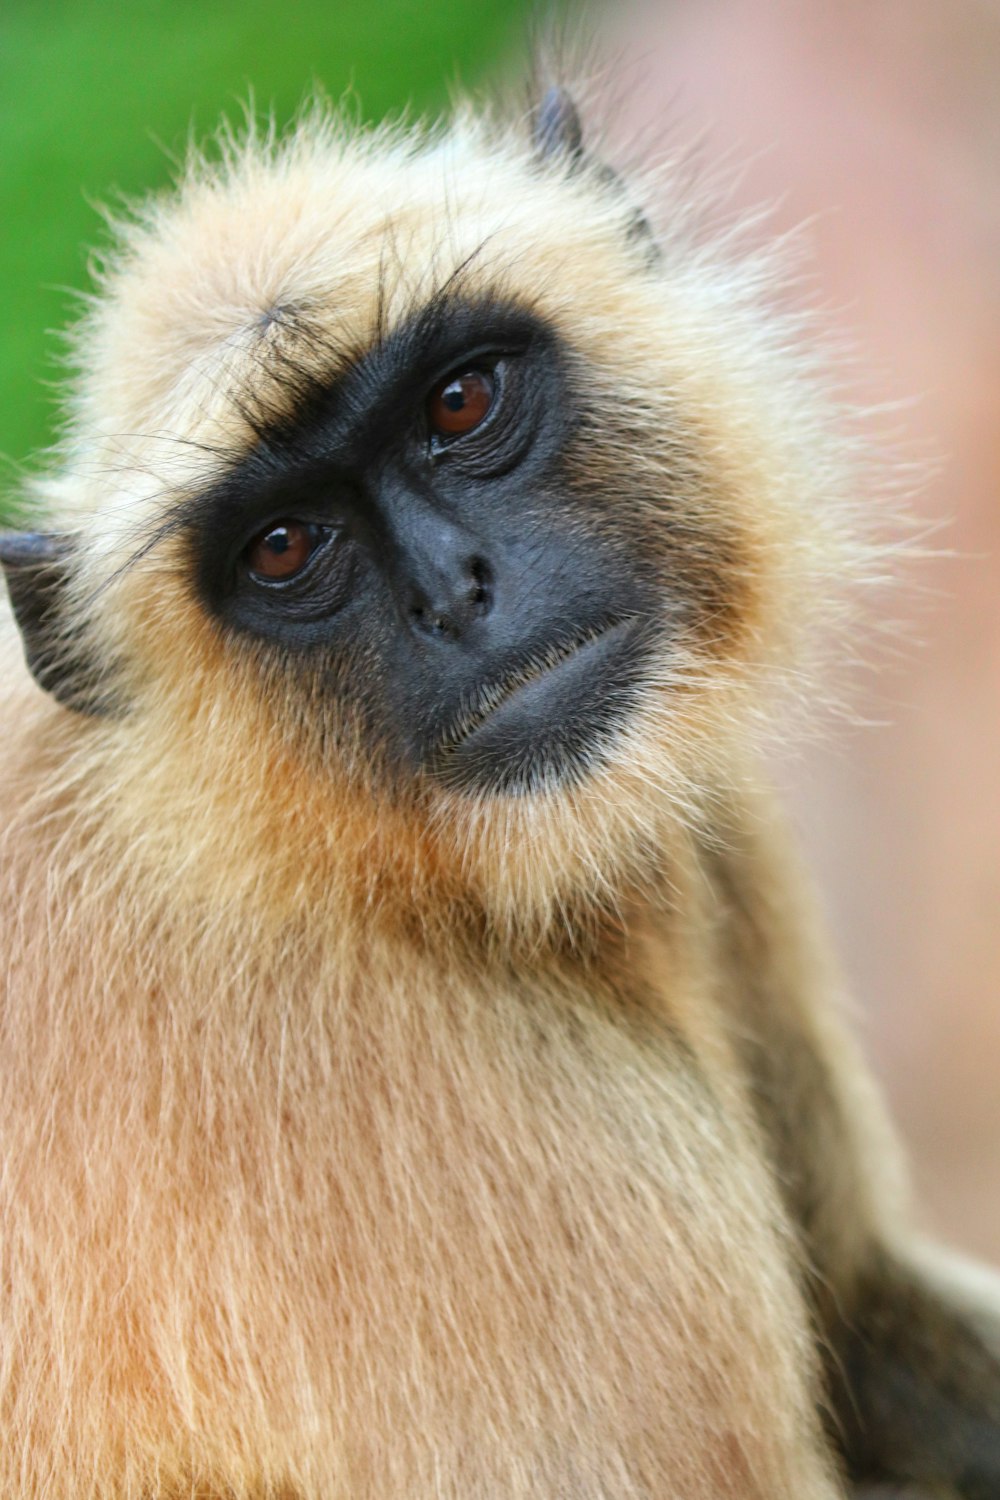 brown and black monkey in close up photography